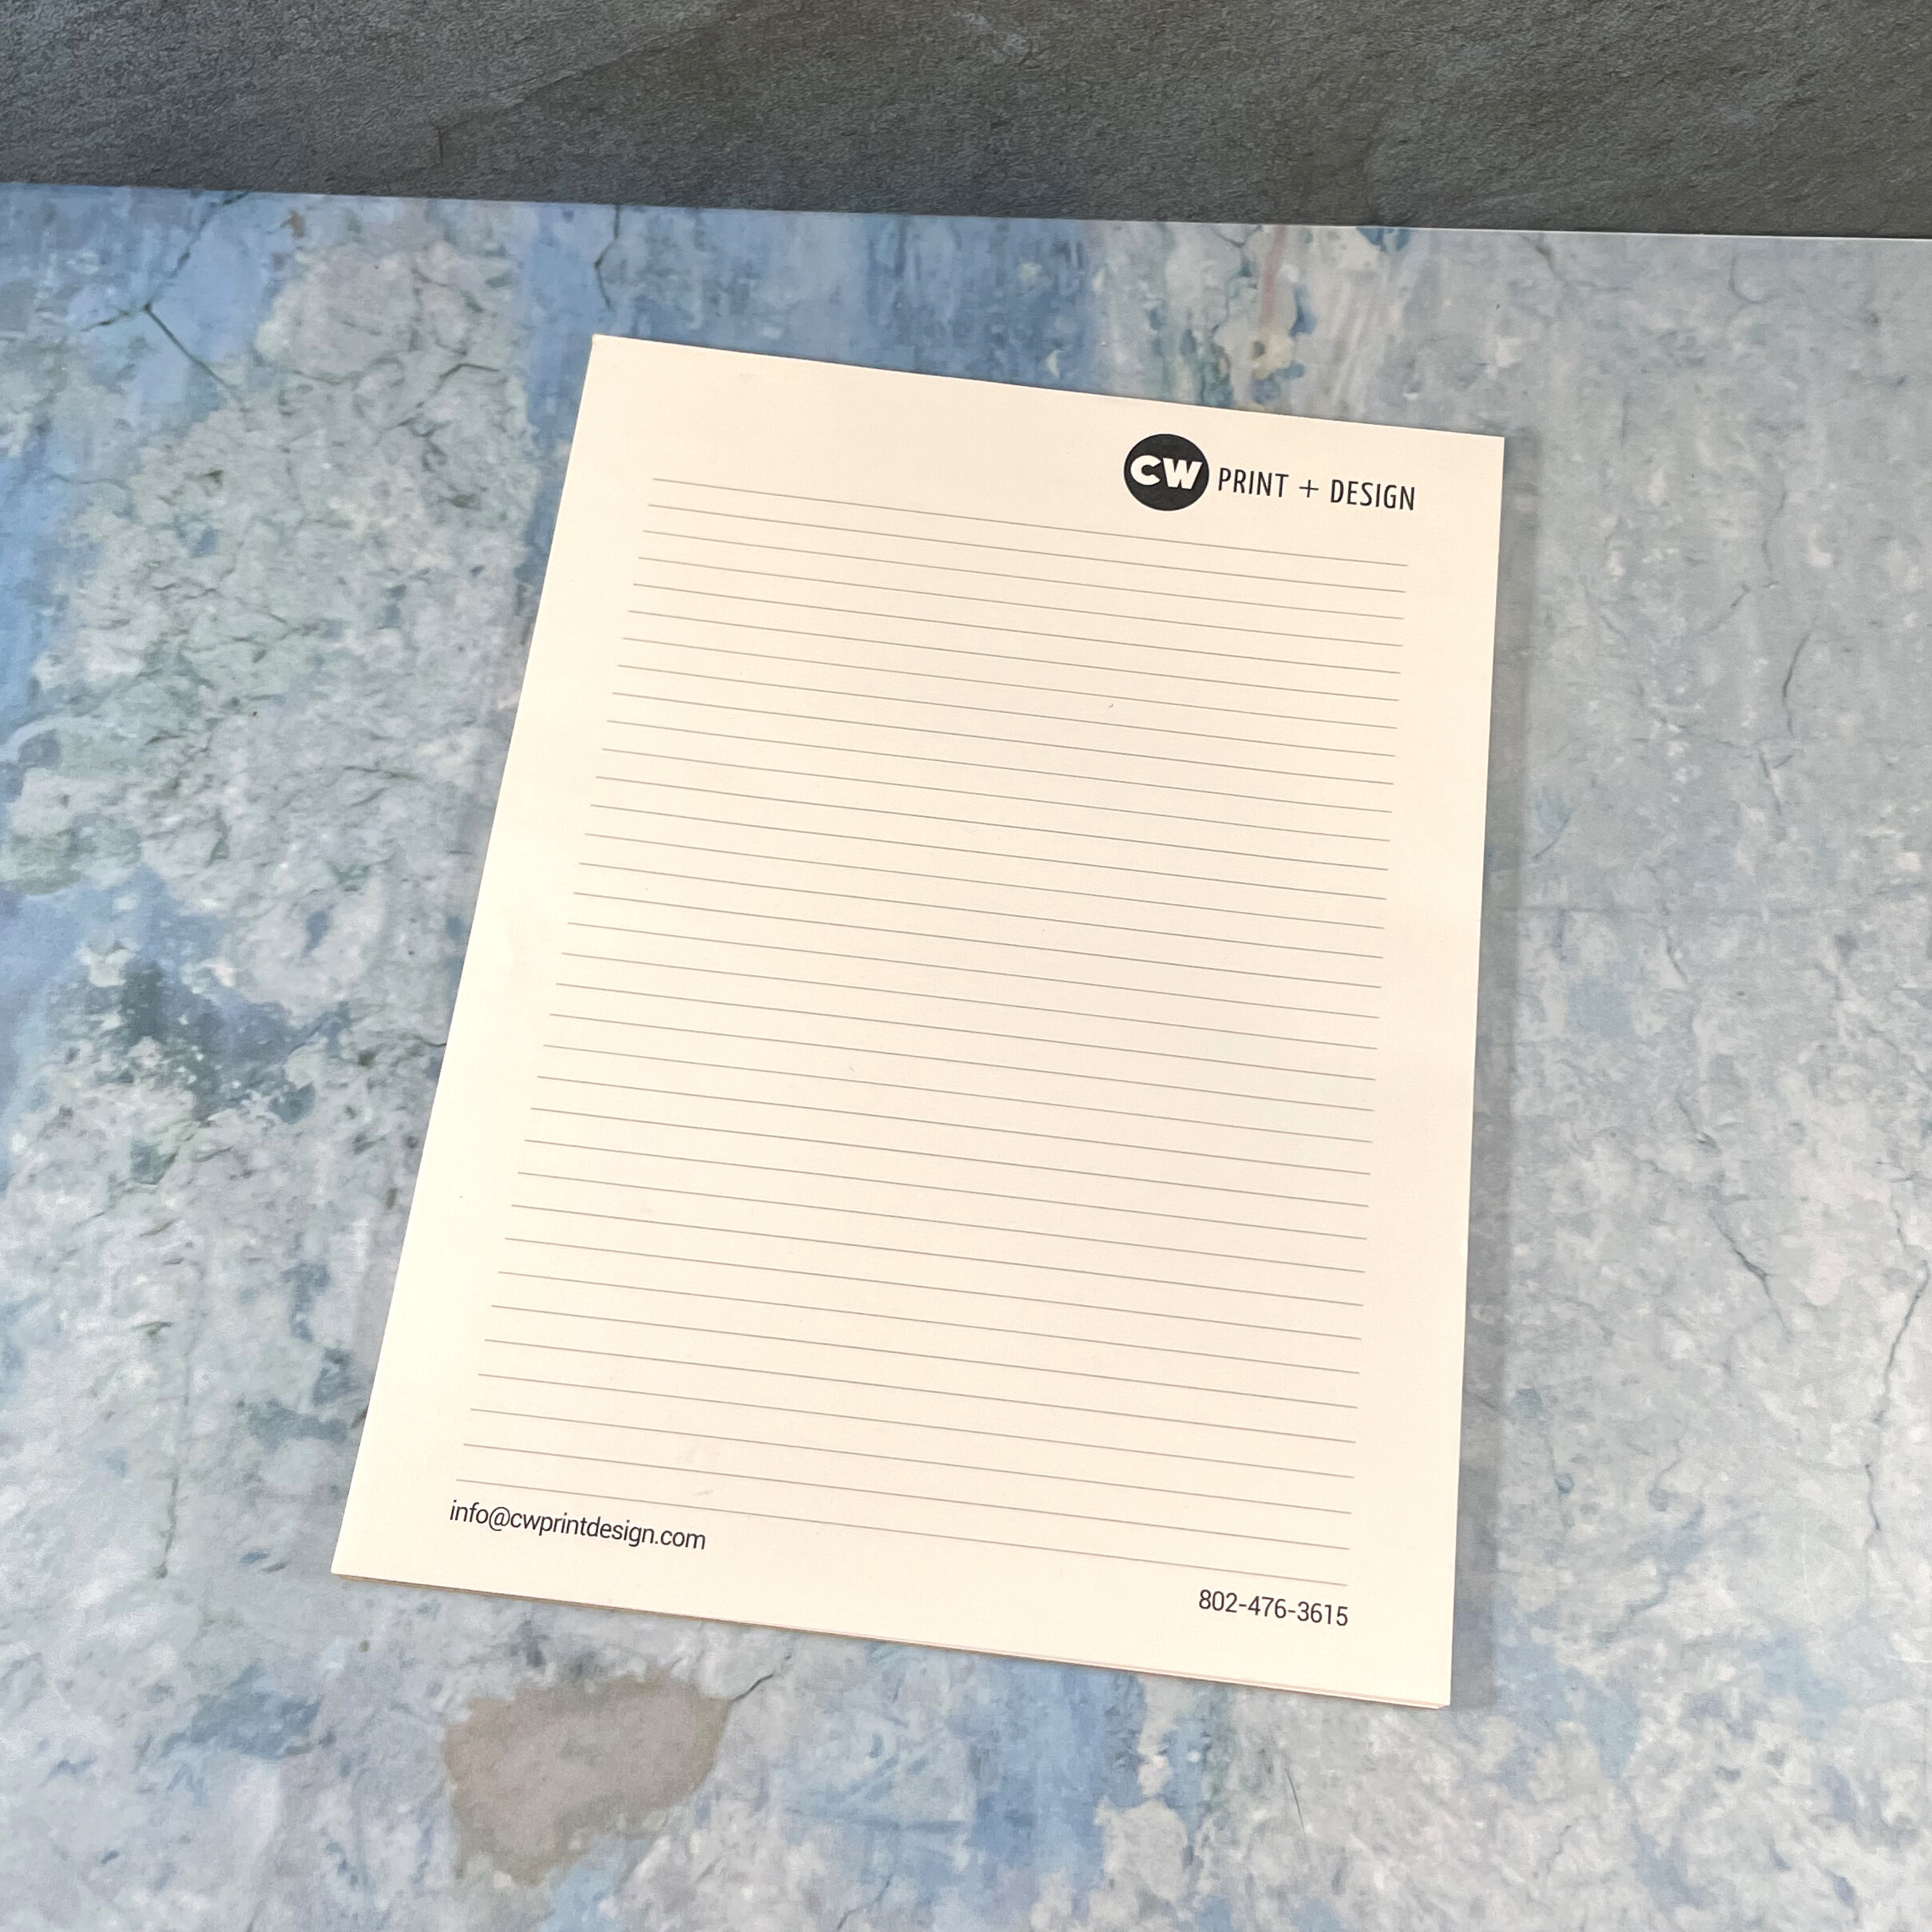 Black and White printed notepad - giveaway promotional item.